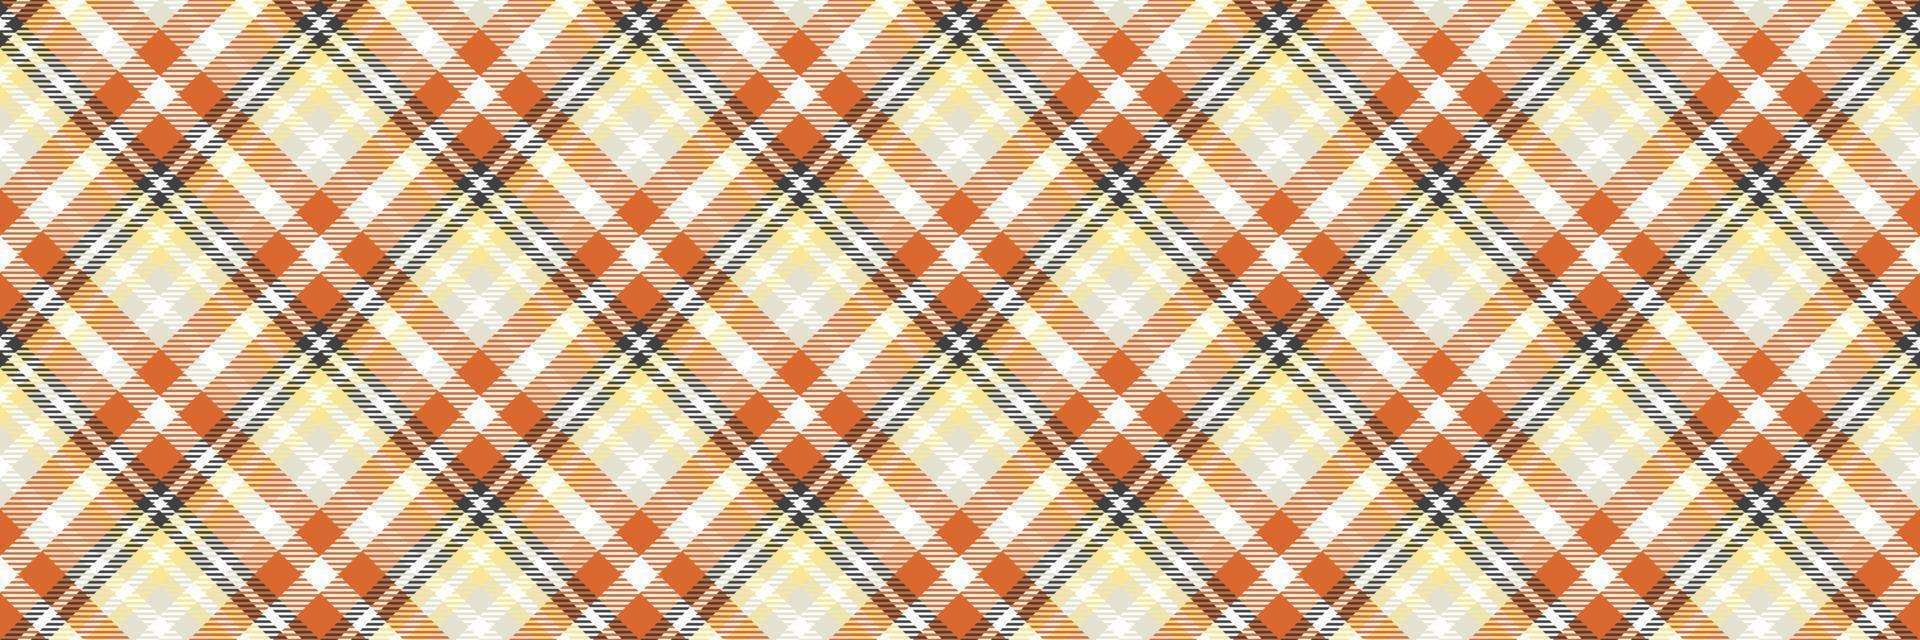 Plaids pattern is a patterned cloth consisting of criss crossed, horizontal and vertical bands in multiple colours.plaid Seamless for scarf,pyjamas,blanket,duvet,kilt large shawl. vector